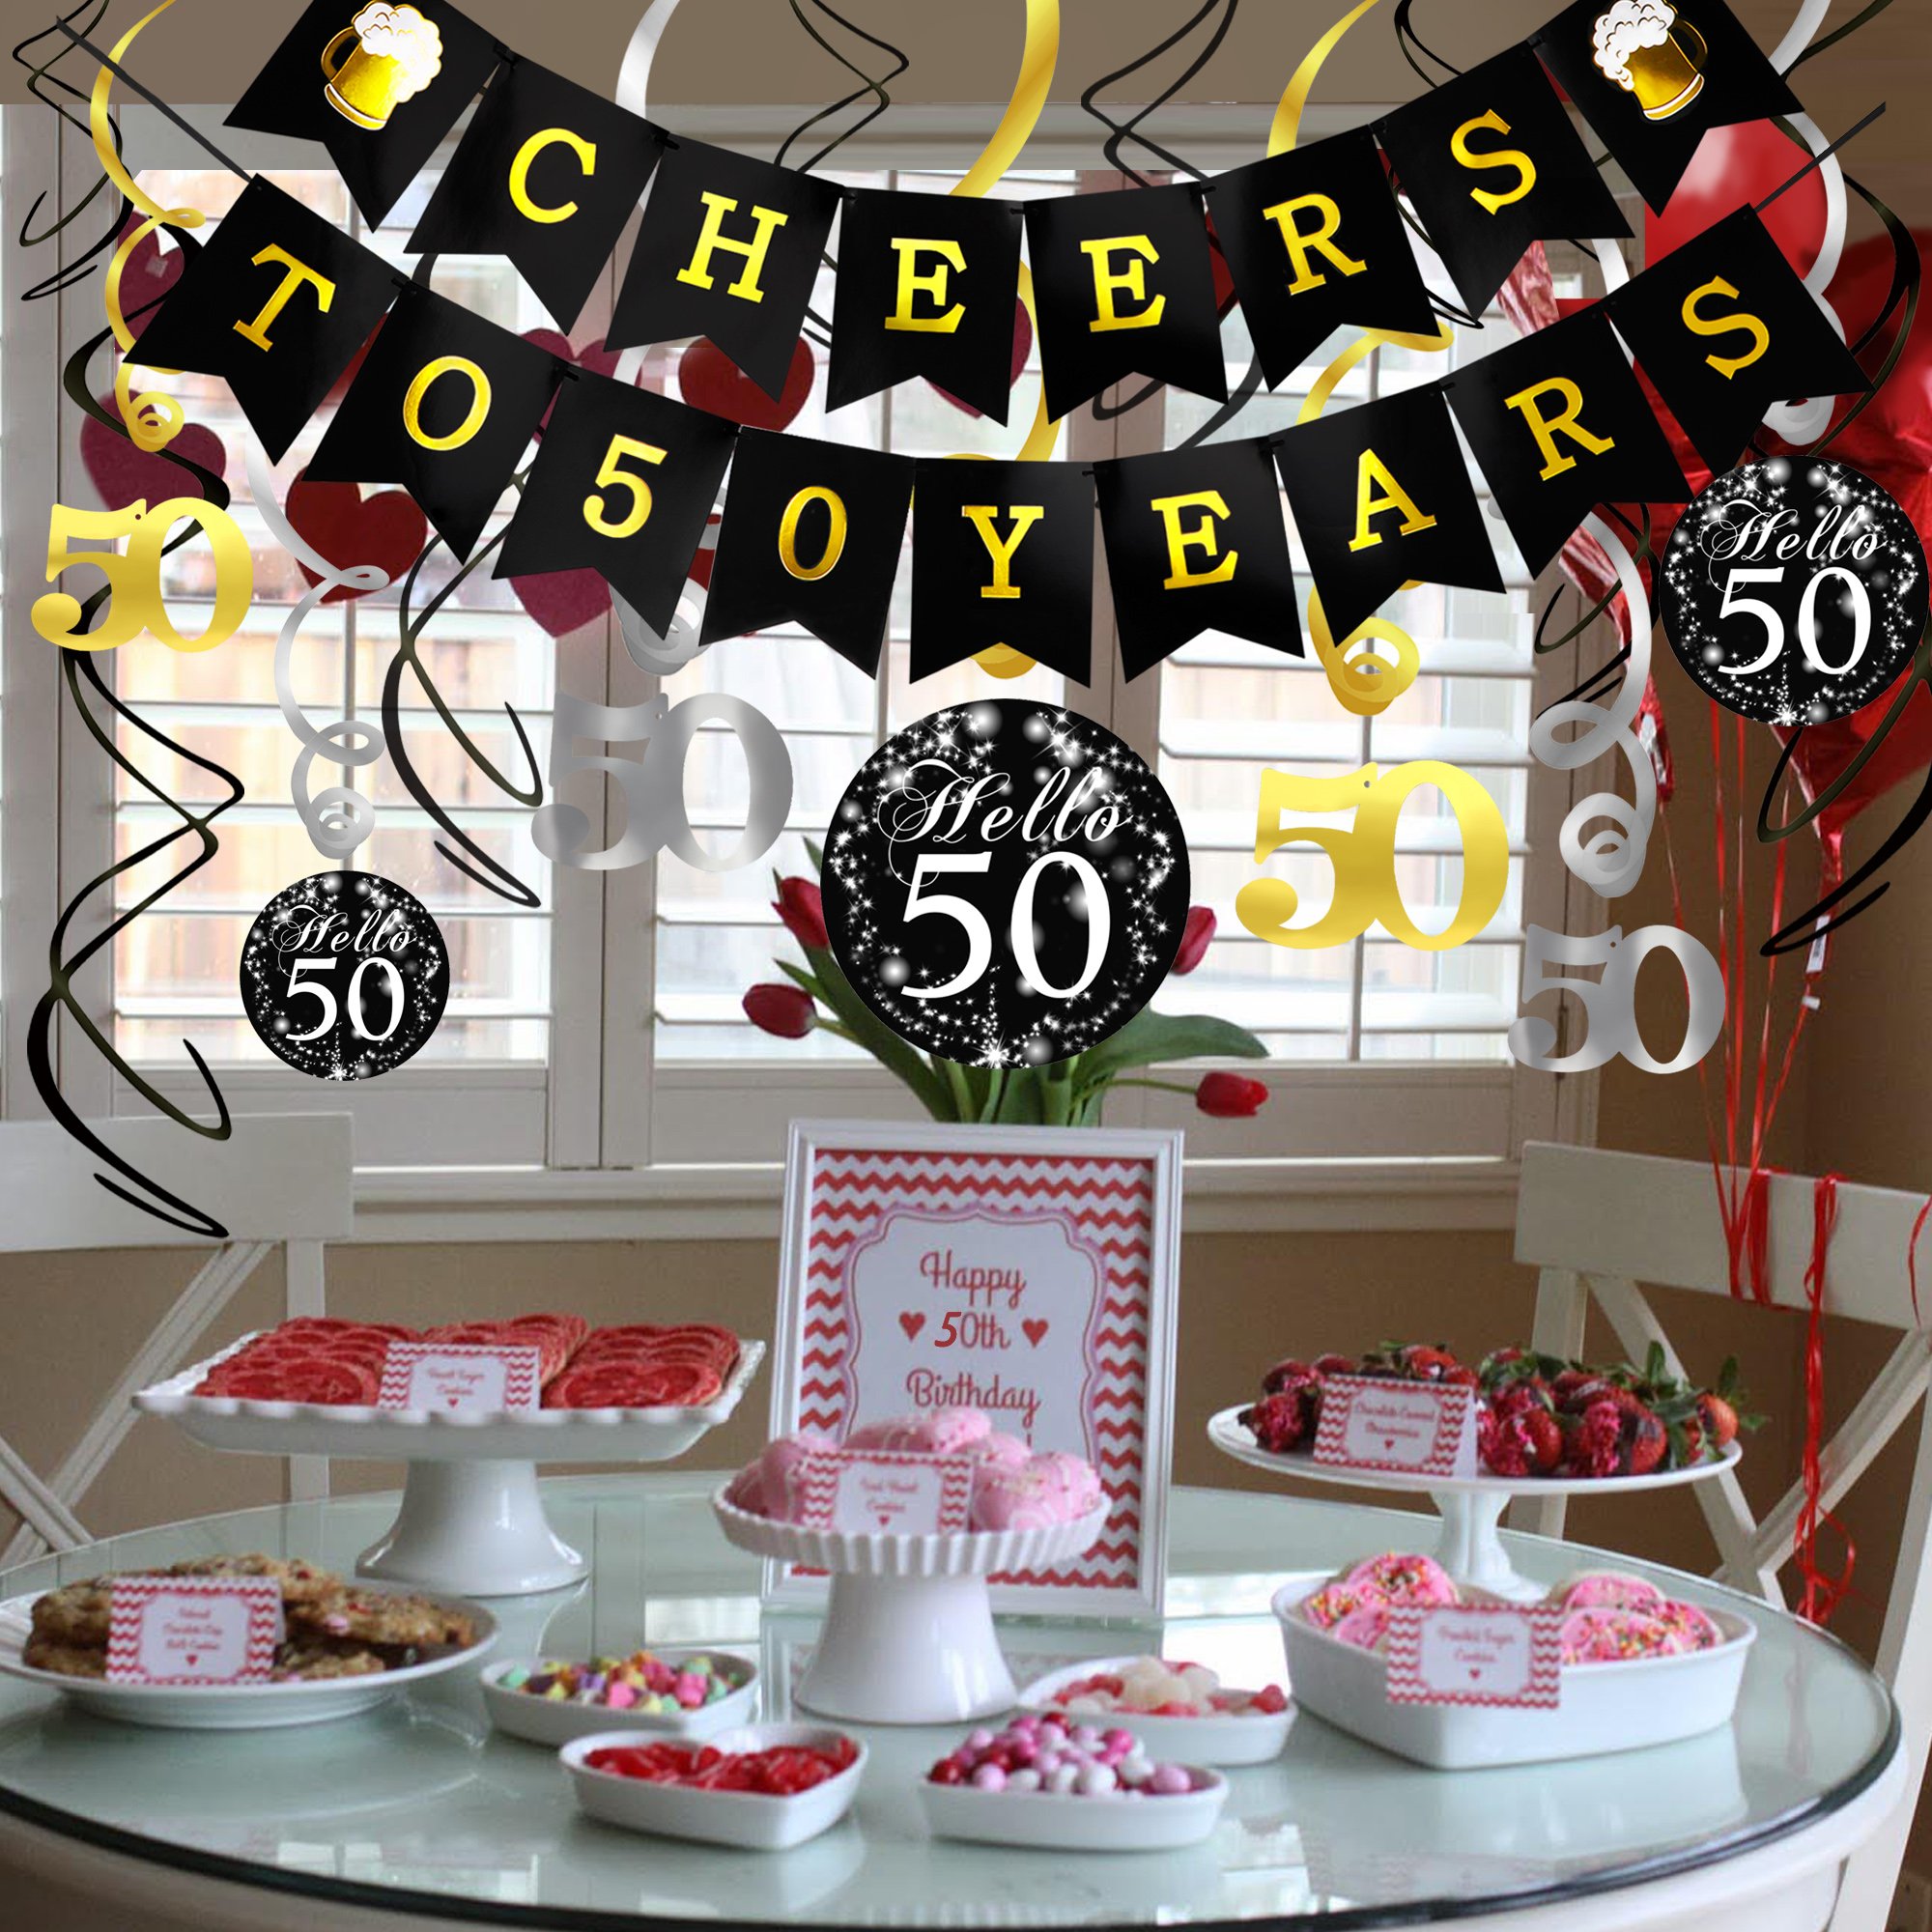 Konsait 50th Birthday Decorations Kit Cheers to 50 Years Banner Swallowtail Bunting Garland Sparkling Celebration 50 Hanging Swirls,Perfect 50 Years Old Party Supplies 50th Anniversary Decorations